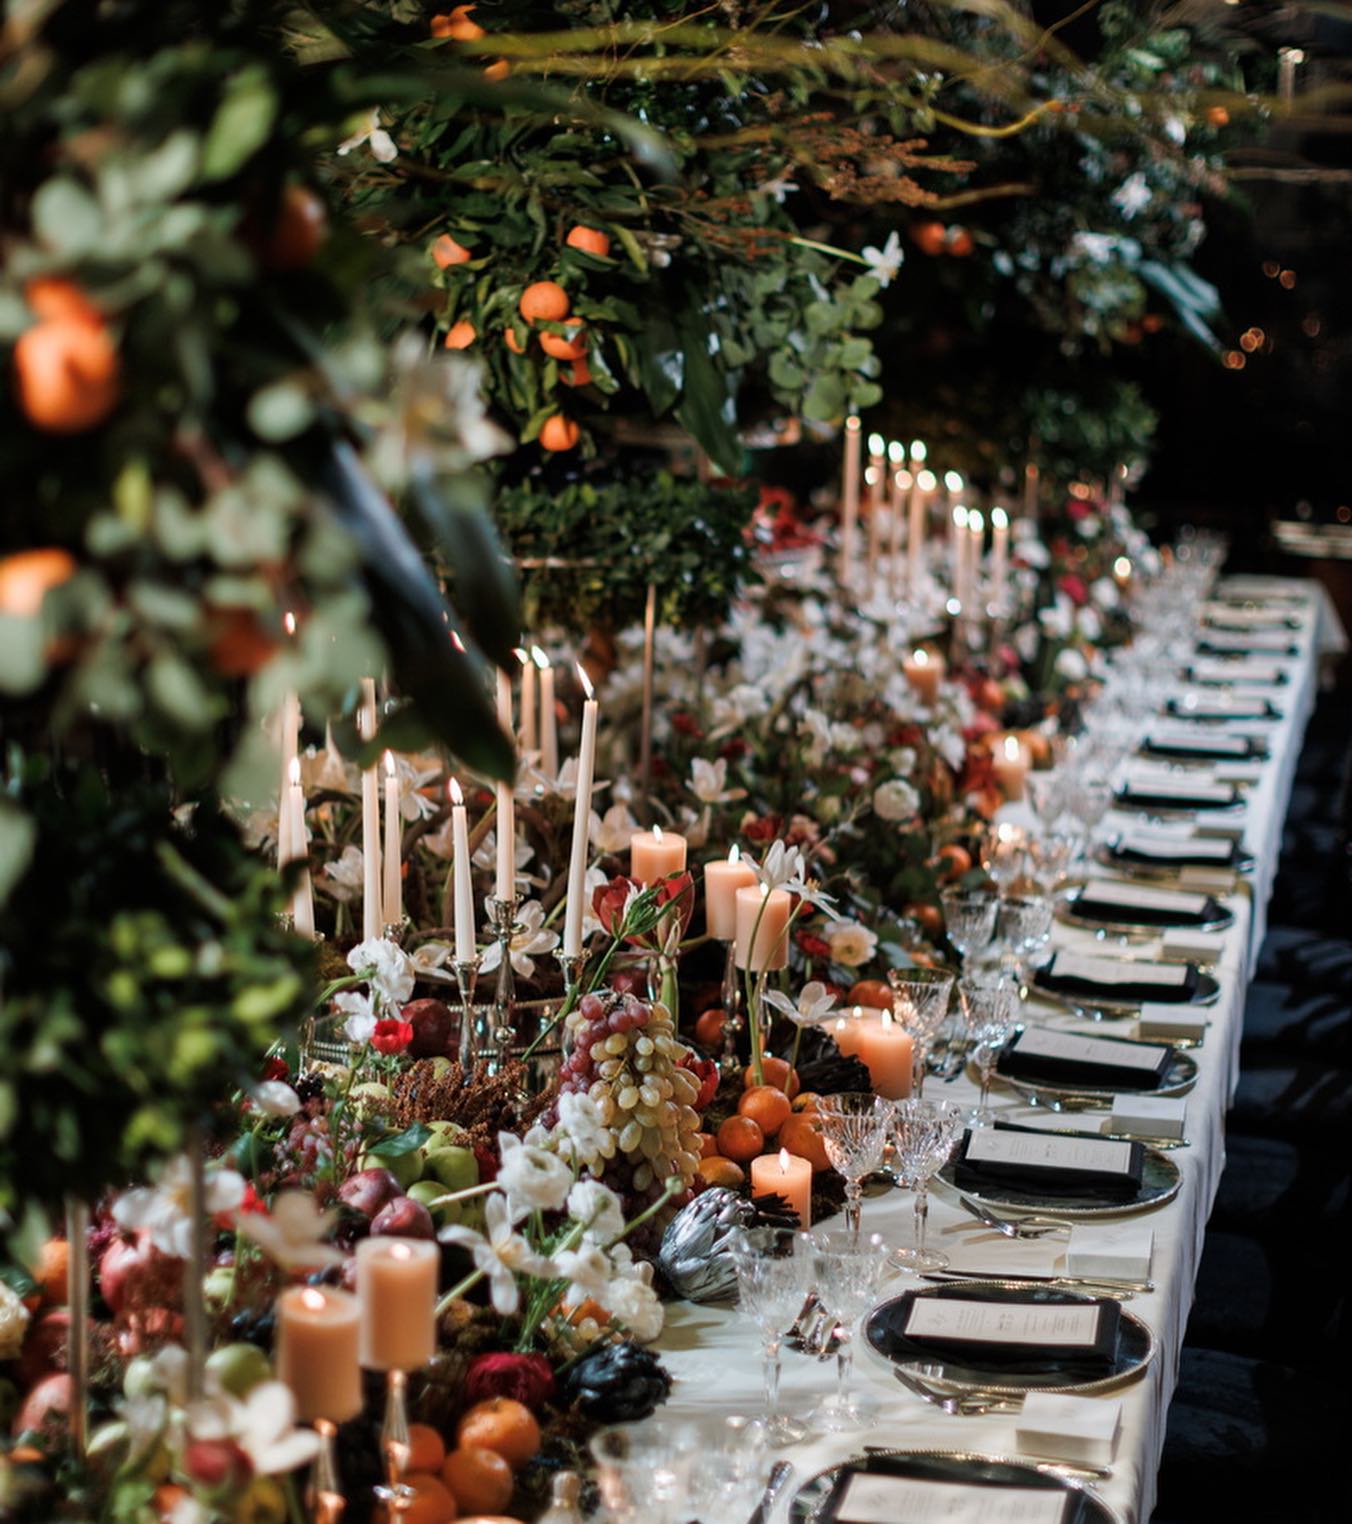 Trending: The Organic Elegance of Fruits, Florals, and Greenery in Wedding Tablescapes